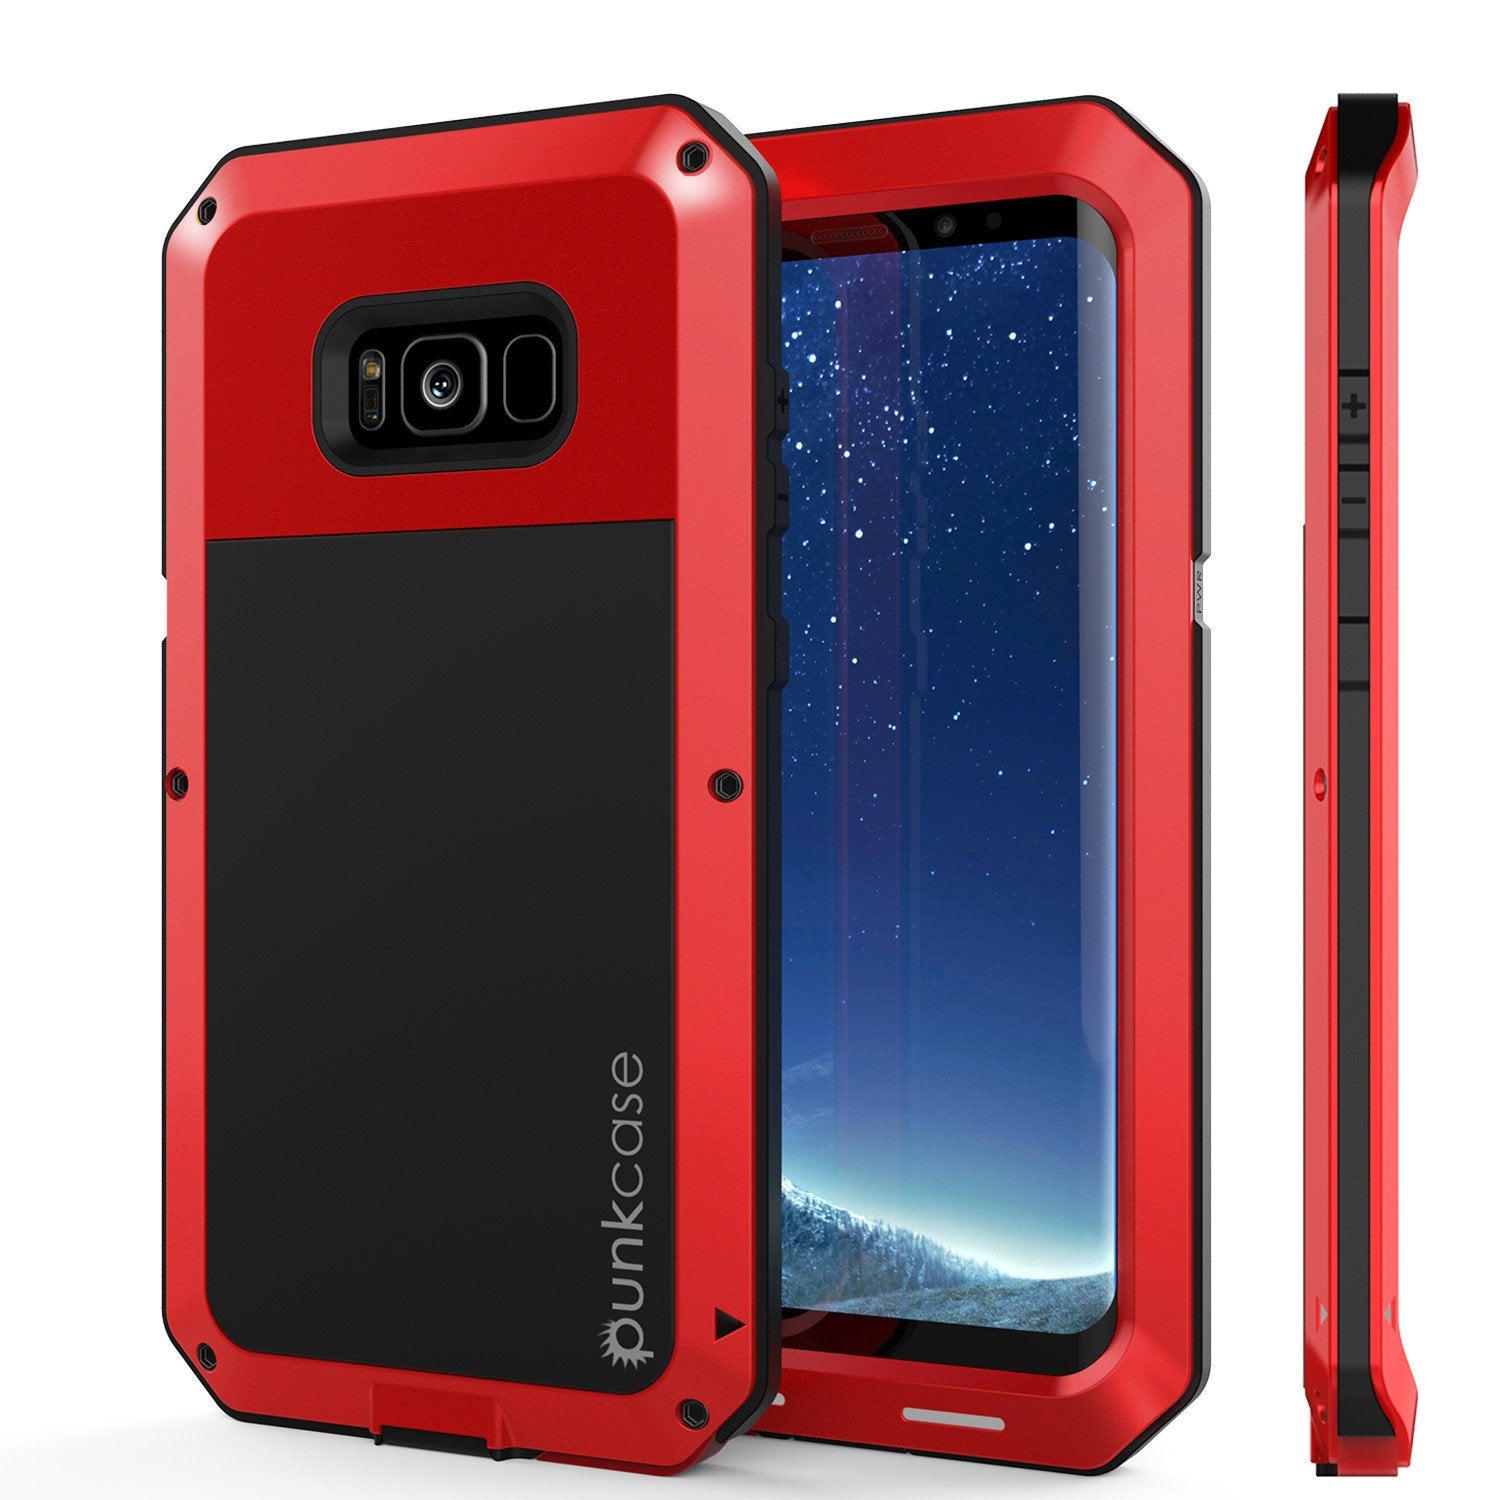 Galaxy S8 Metal Case, Heavy Duty Military Grade Rugged Armor Cover [shock proof] W/ Prime Drop Protection [RED]